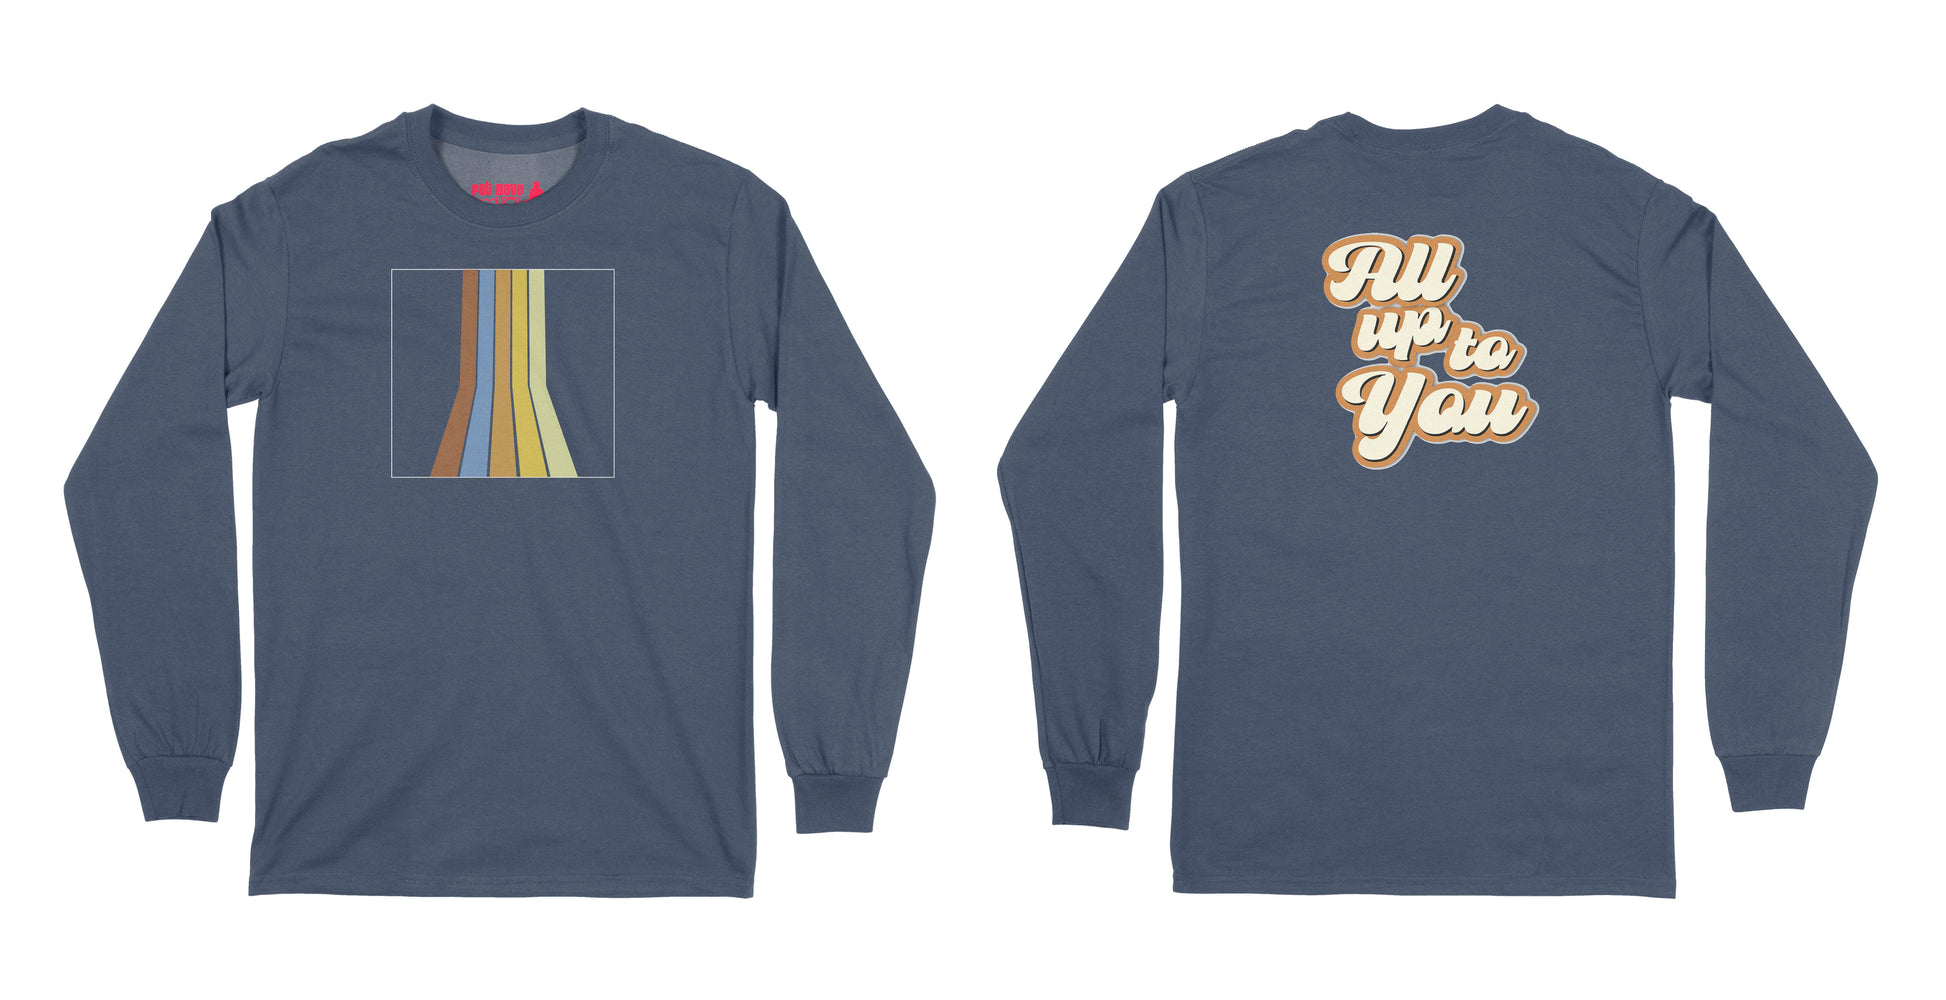 Avery Raquel All Up To You Long Sleeve T-Shirt Small Navy Blue